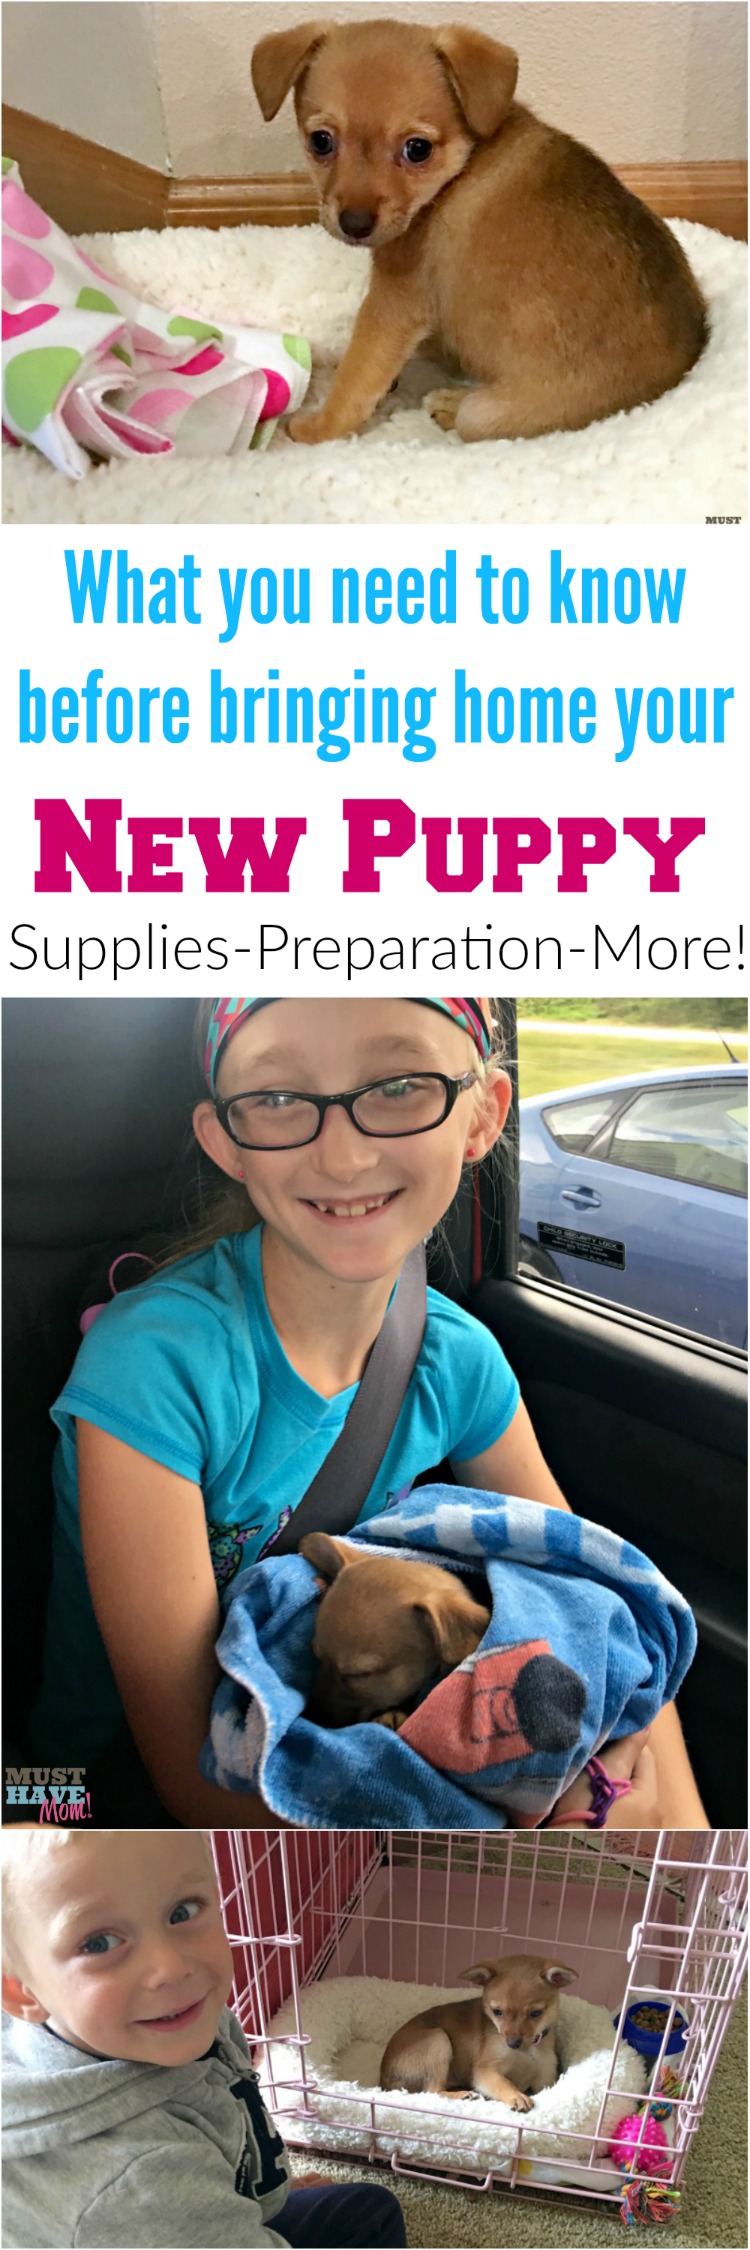 Ultimate guide to bringing home your new puppy! Everything you need to know before you bring home a puppy! Surprising supplies you might have forgot and other must haves you haven't even thought of! Pin for reference later!